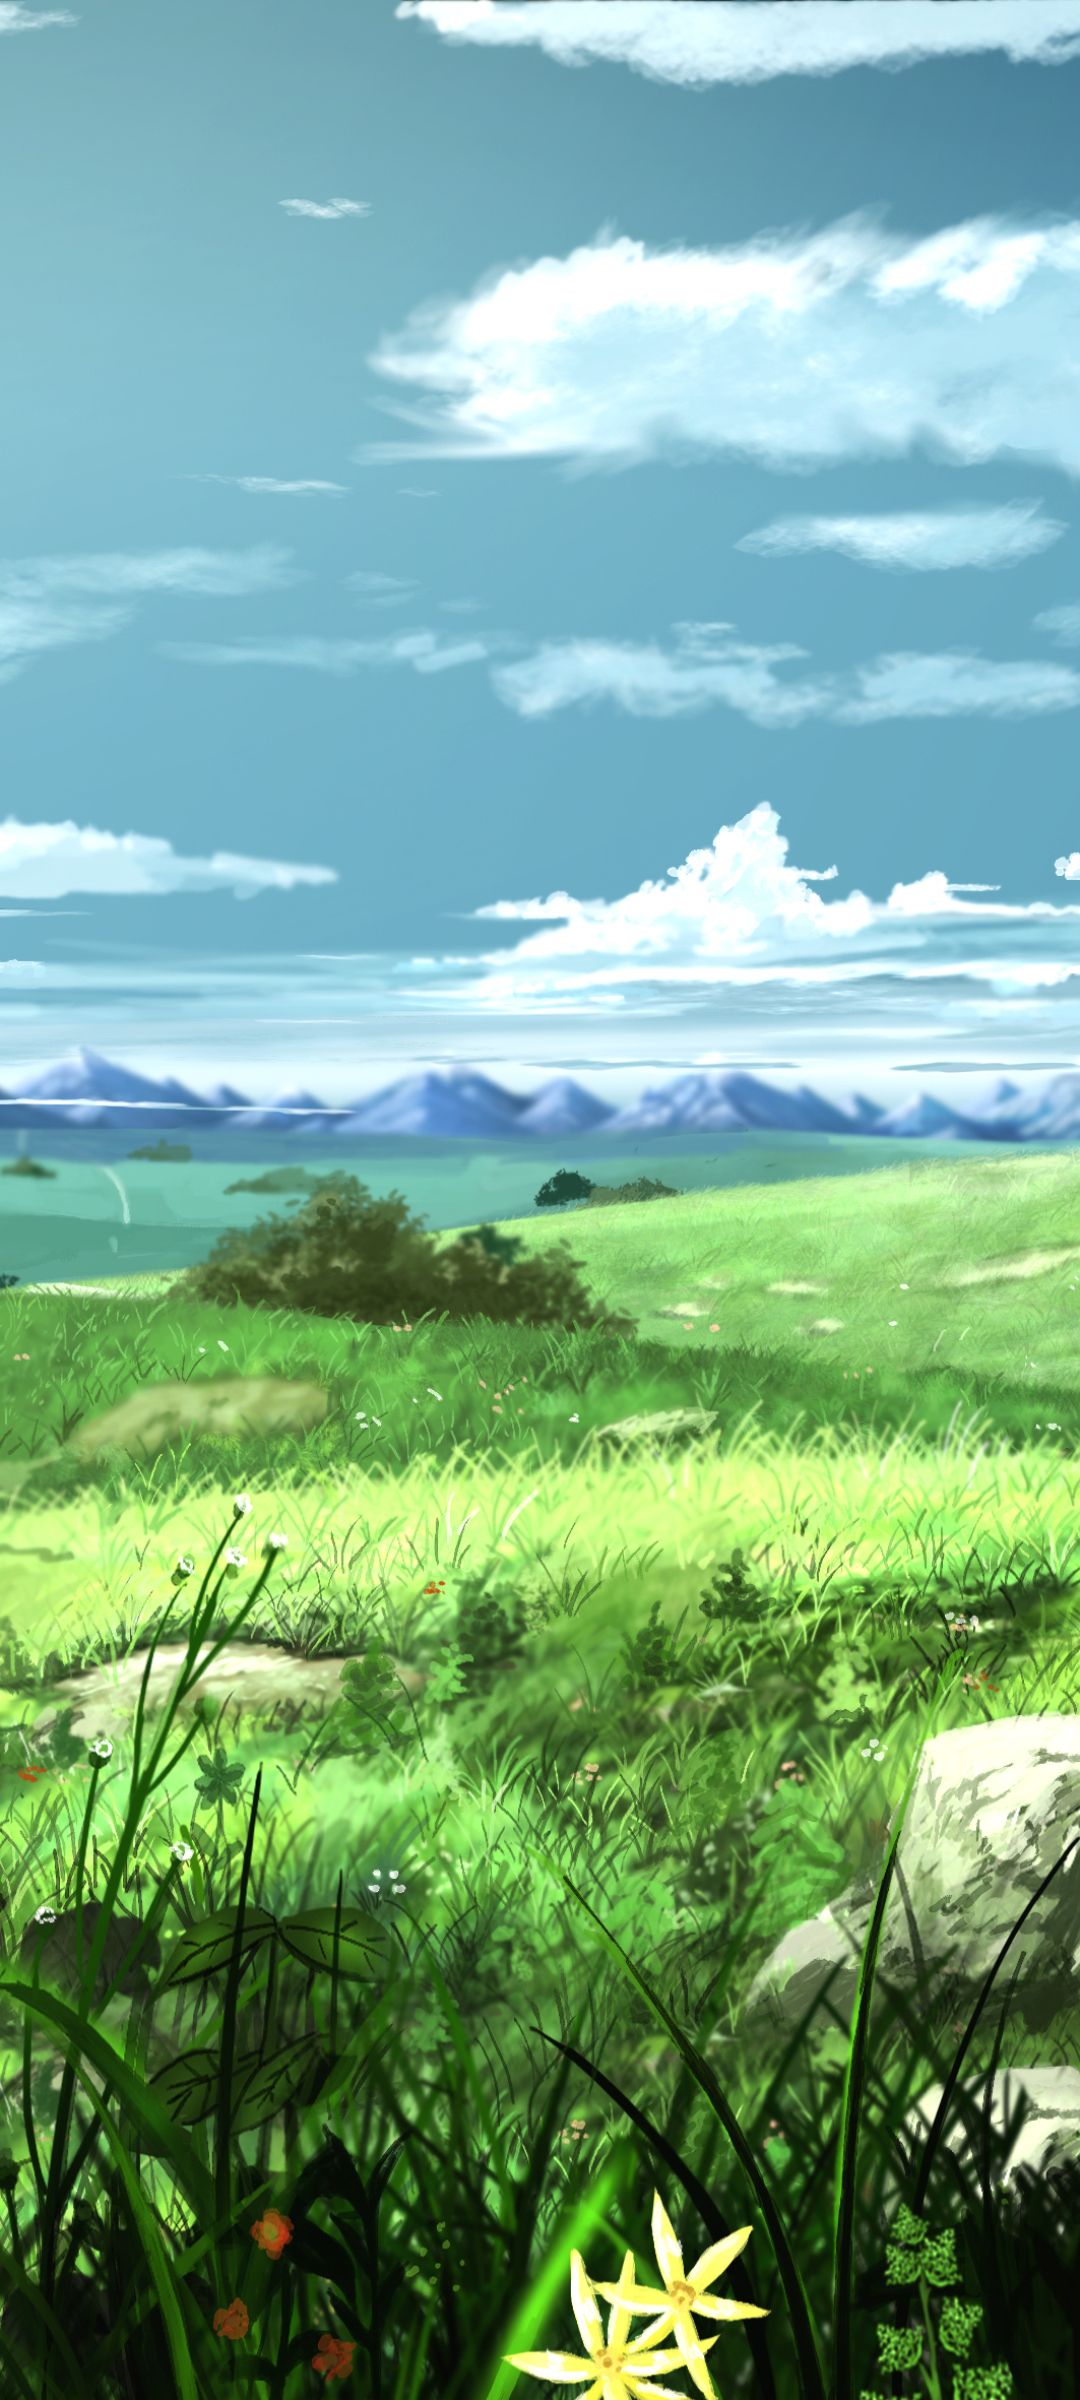 A wallpaper of a field with grass, flowers, and mountains in the background - Anime landscape